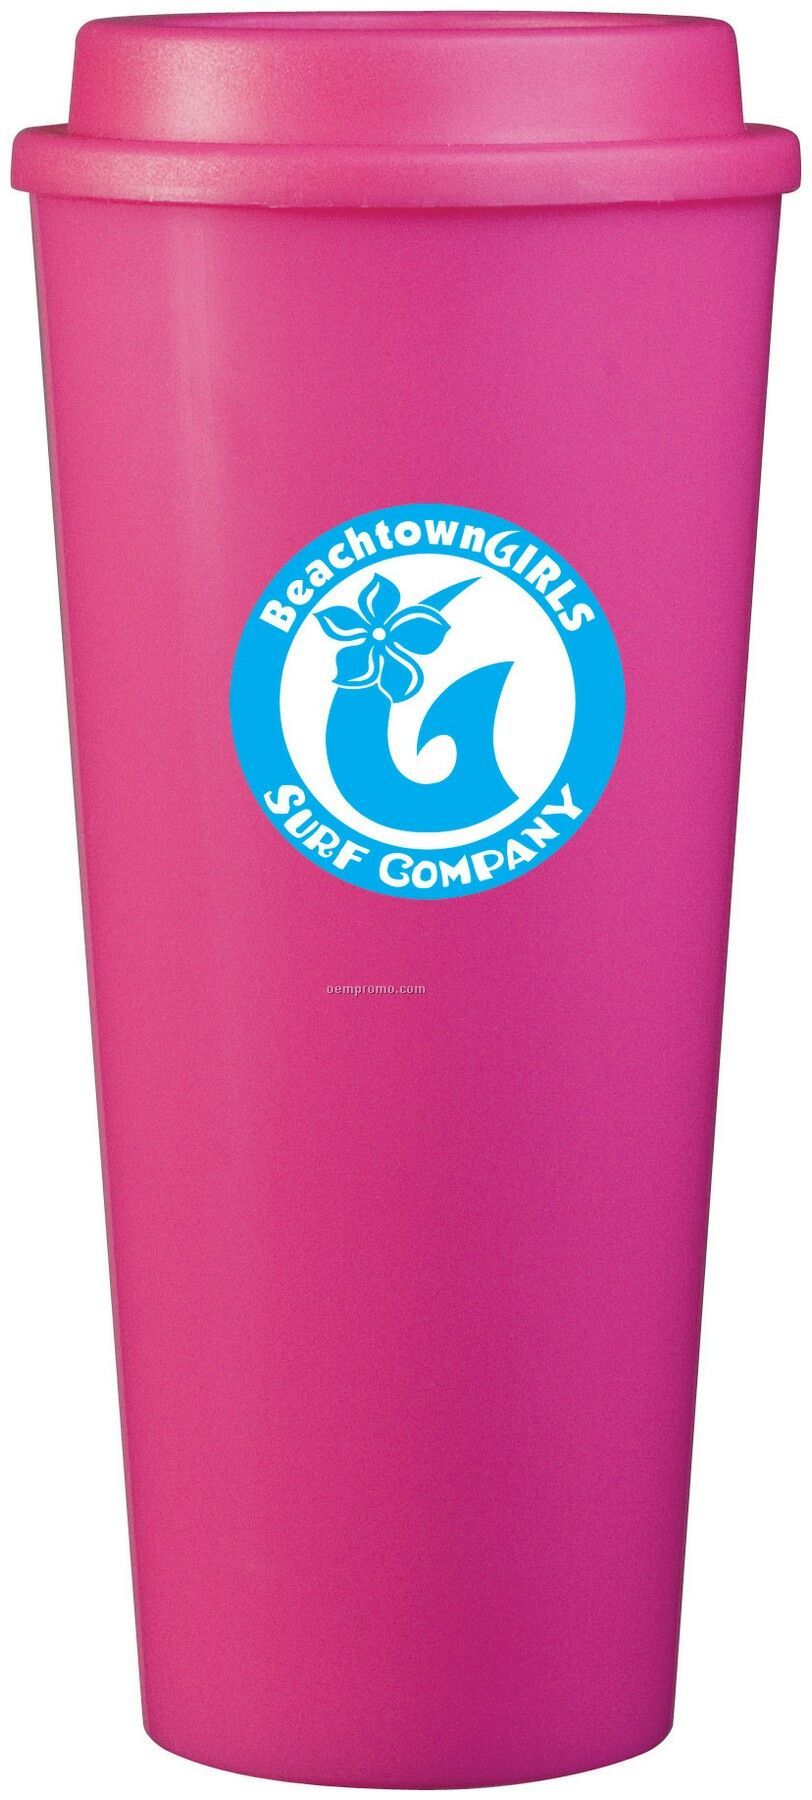 20 Oz. Pink Plastic Cup2go Cup